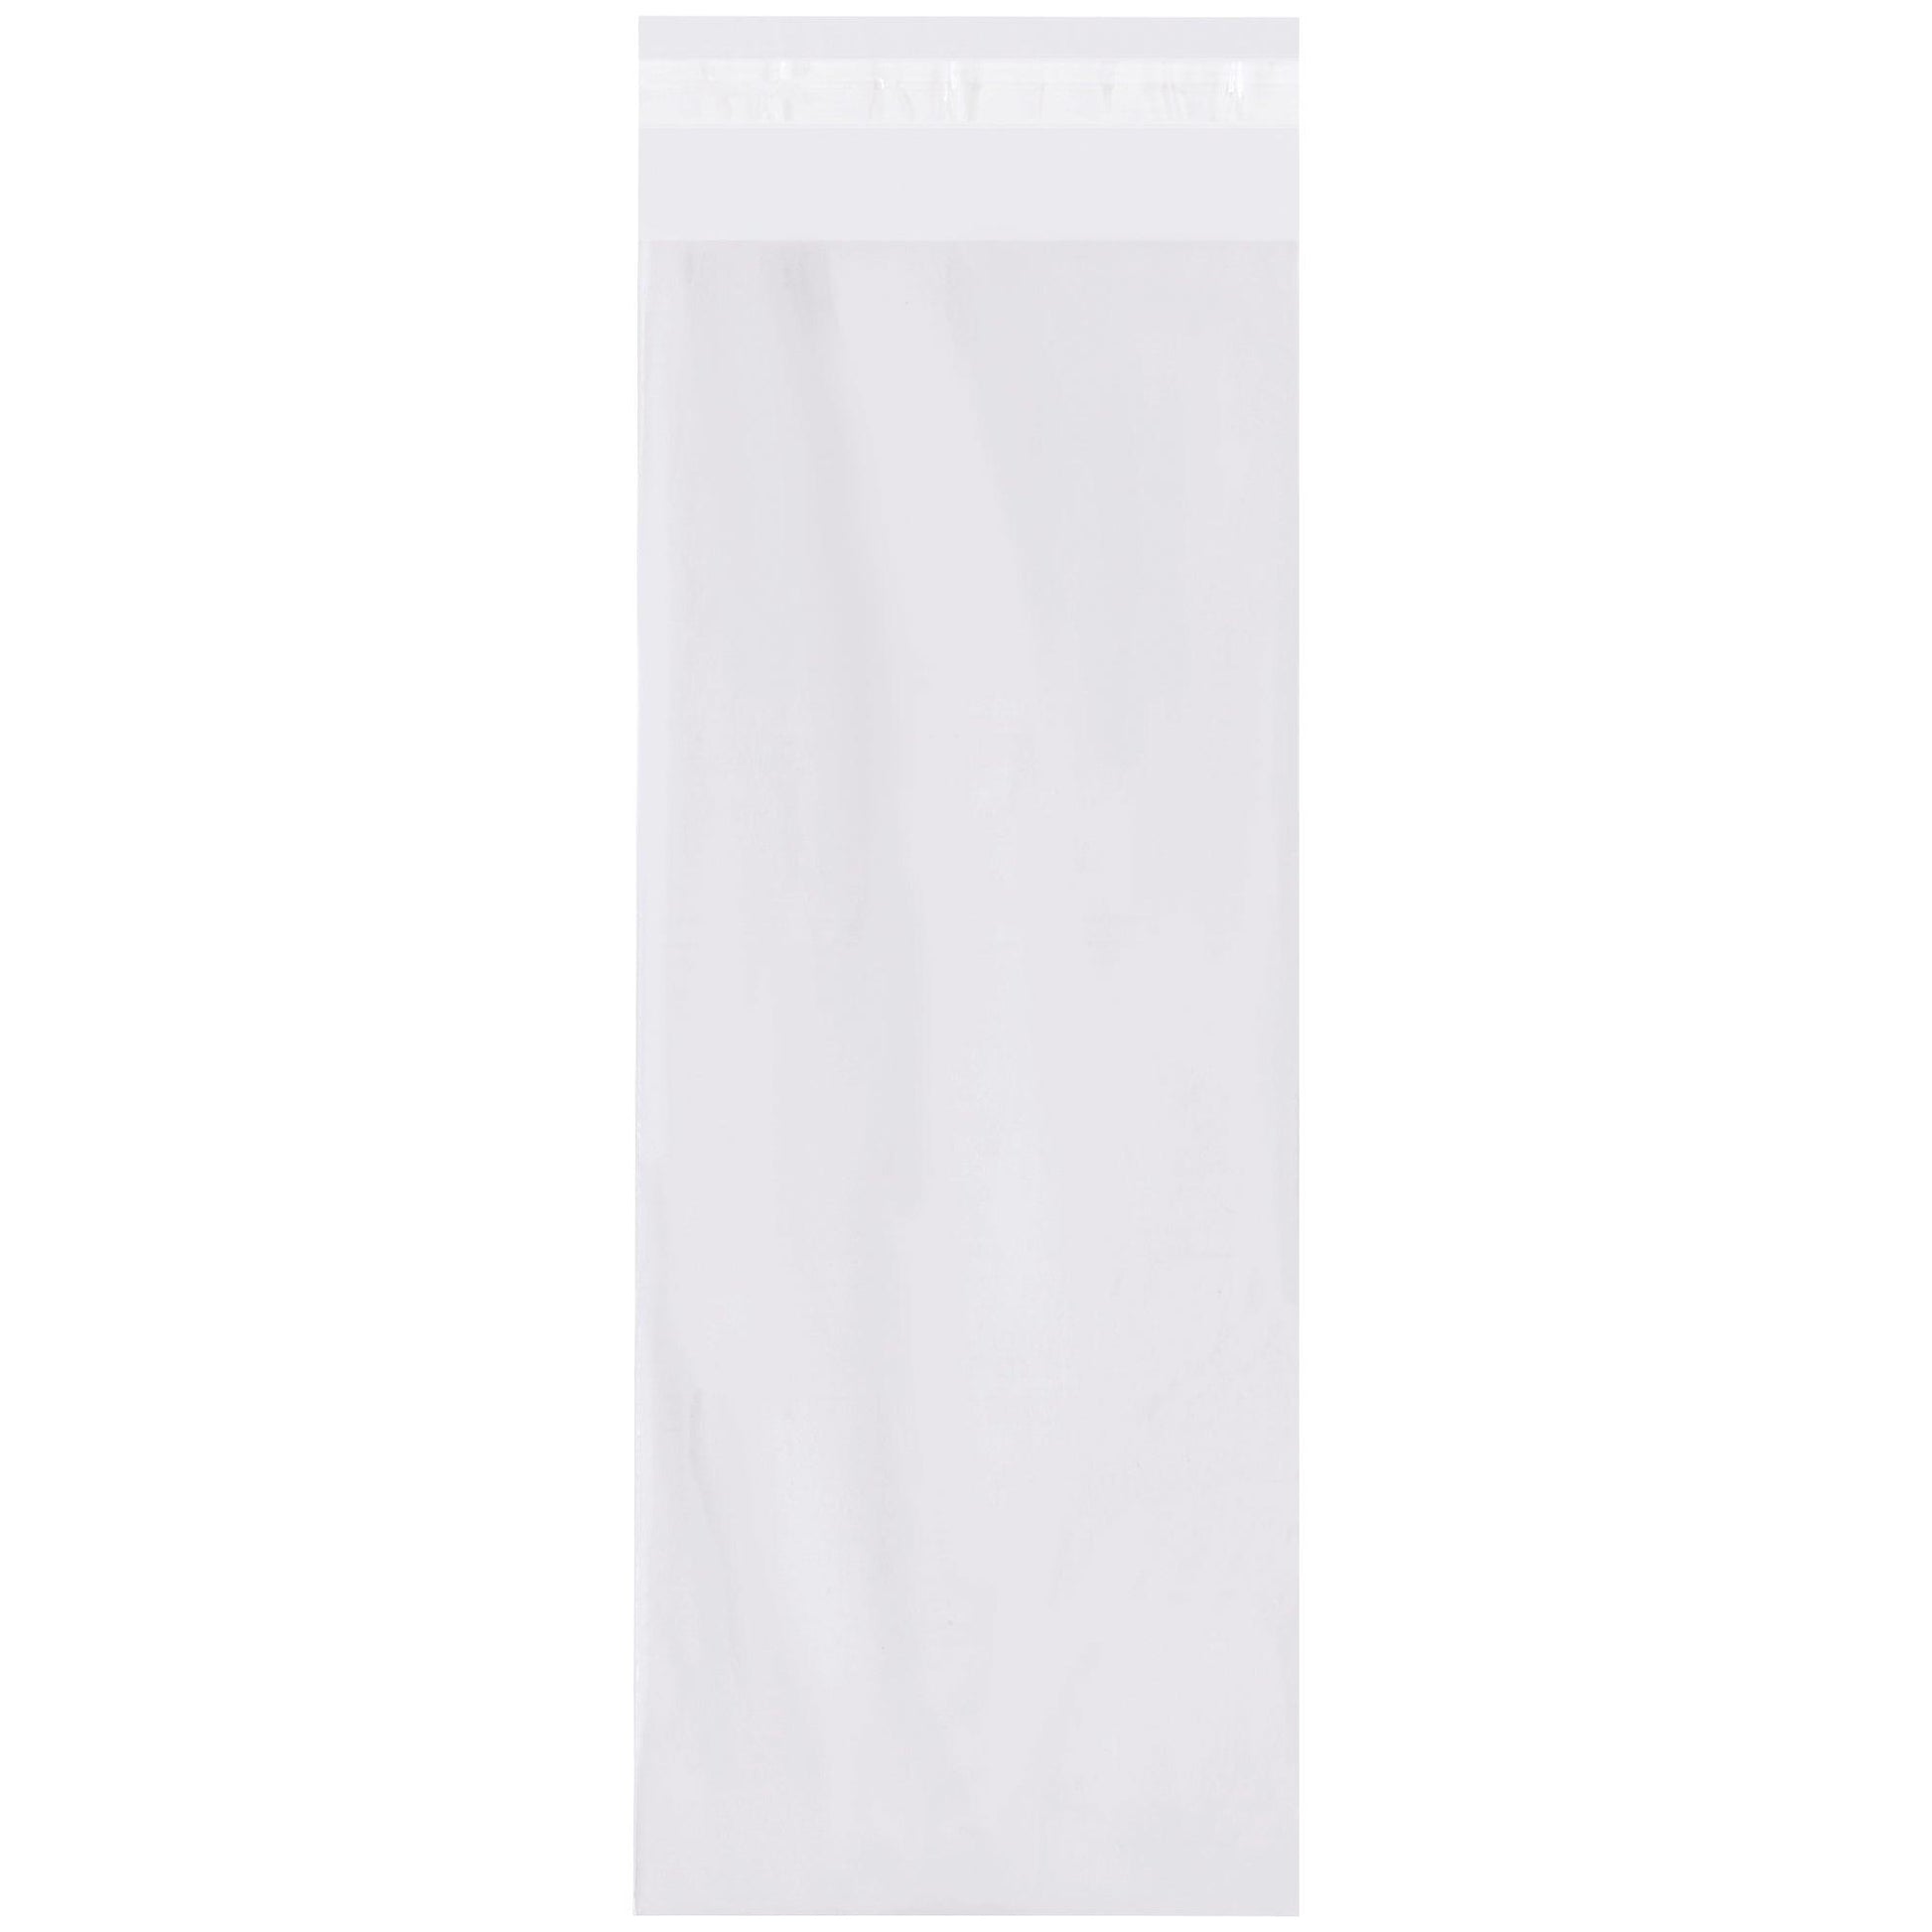 4 x 10" - 1.5 Mil Resealable Poly Bags - PRR041015